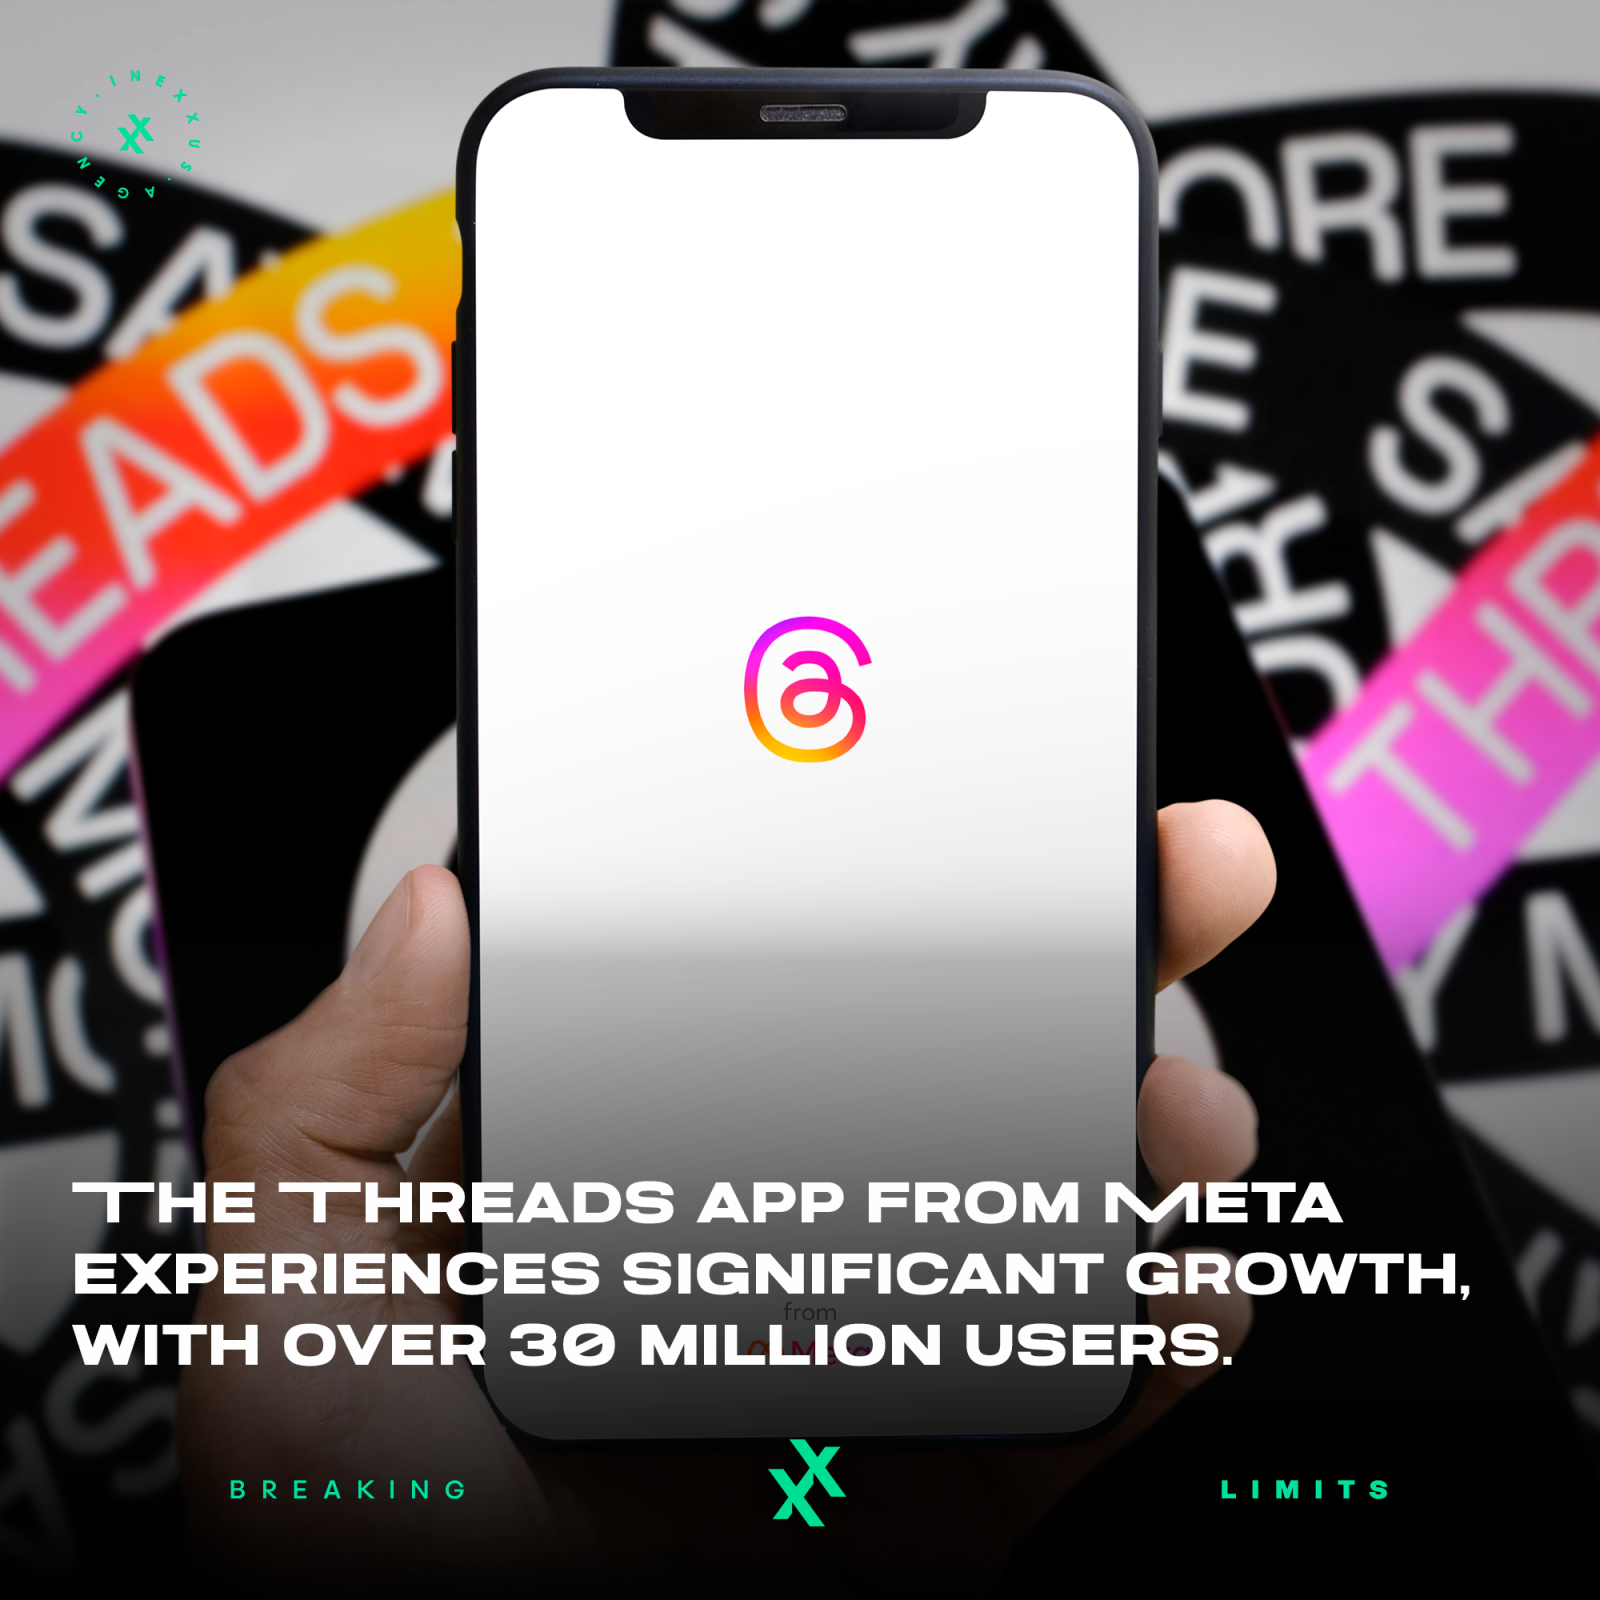 The Threads app from Meta experiences significant growth, with over 30 million users.